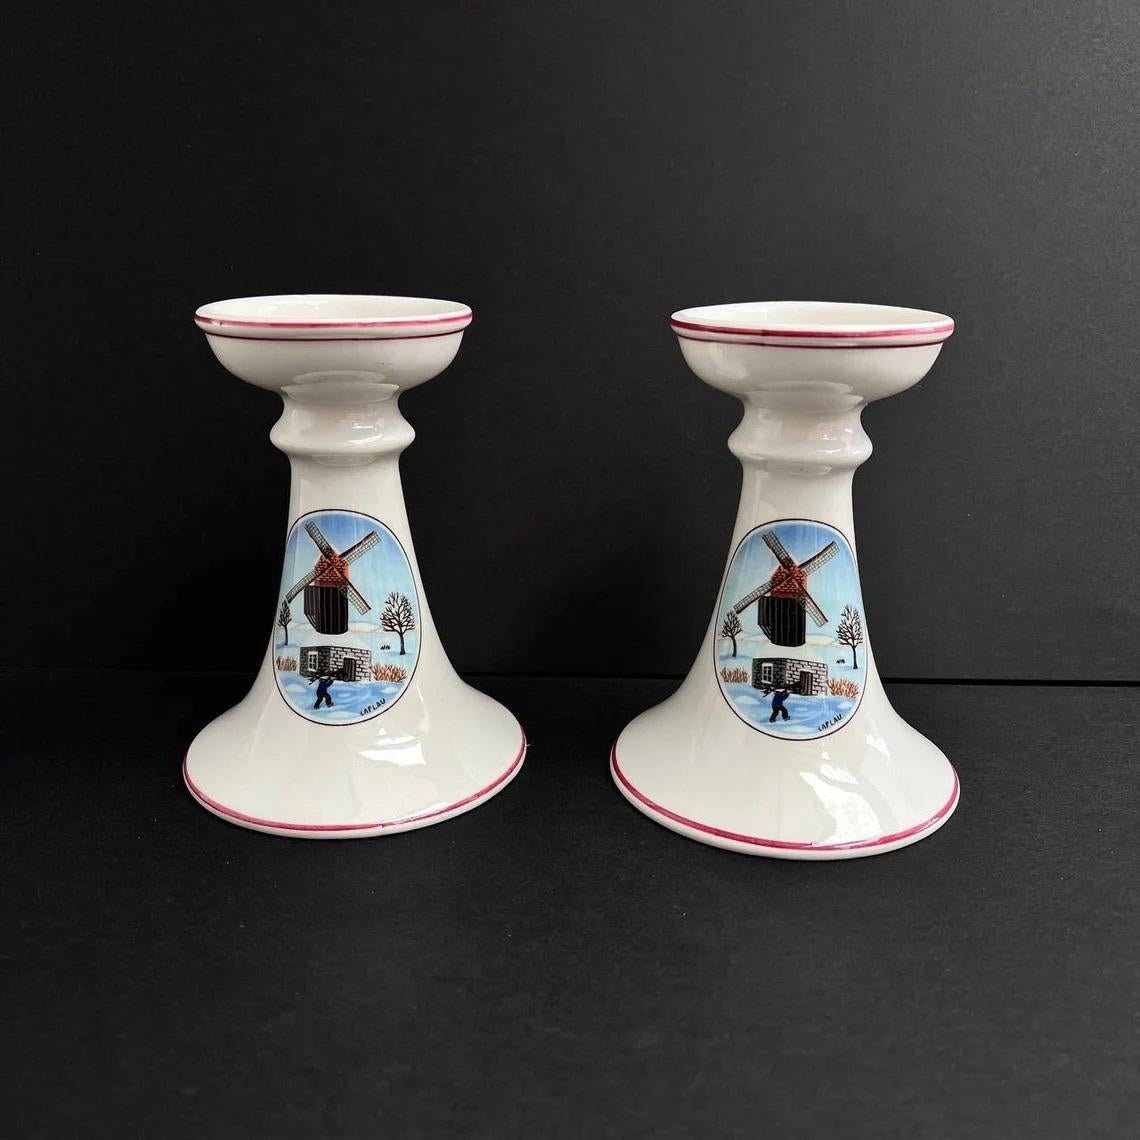 Vintage porcelain Villeroy & Boch Candlesticks.

Christmas Series by French artist Gerard Laplau.

Candlesticks look very exquisite. They will help to create a romantic atmosphere in any room, especially well written off in a classic interior.